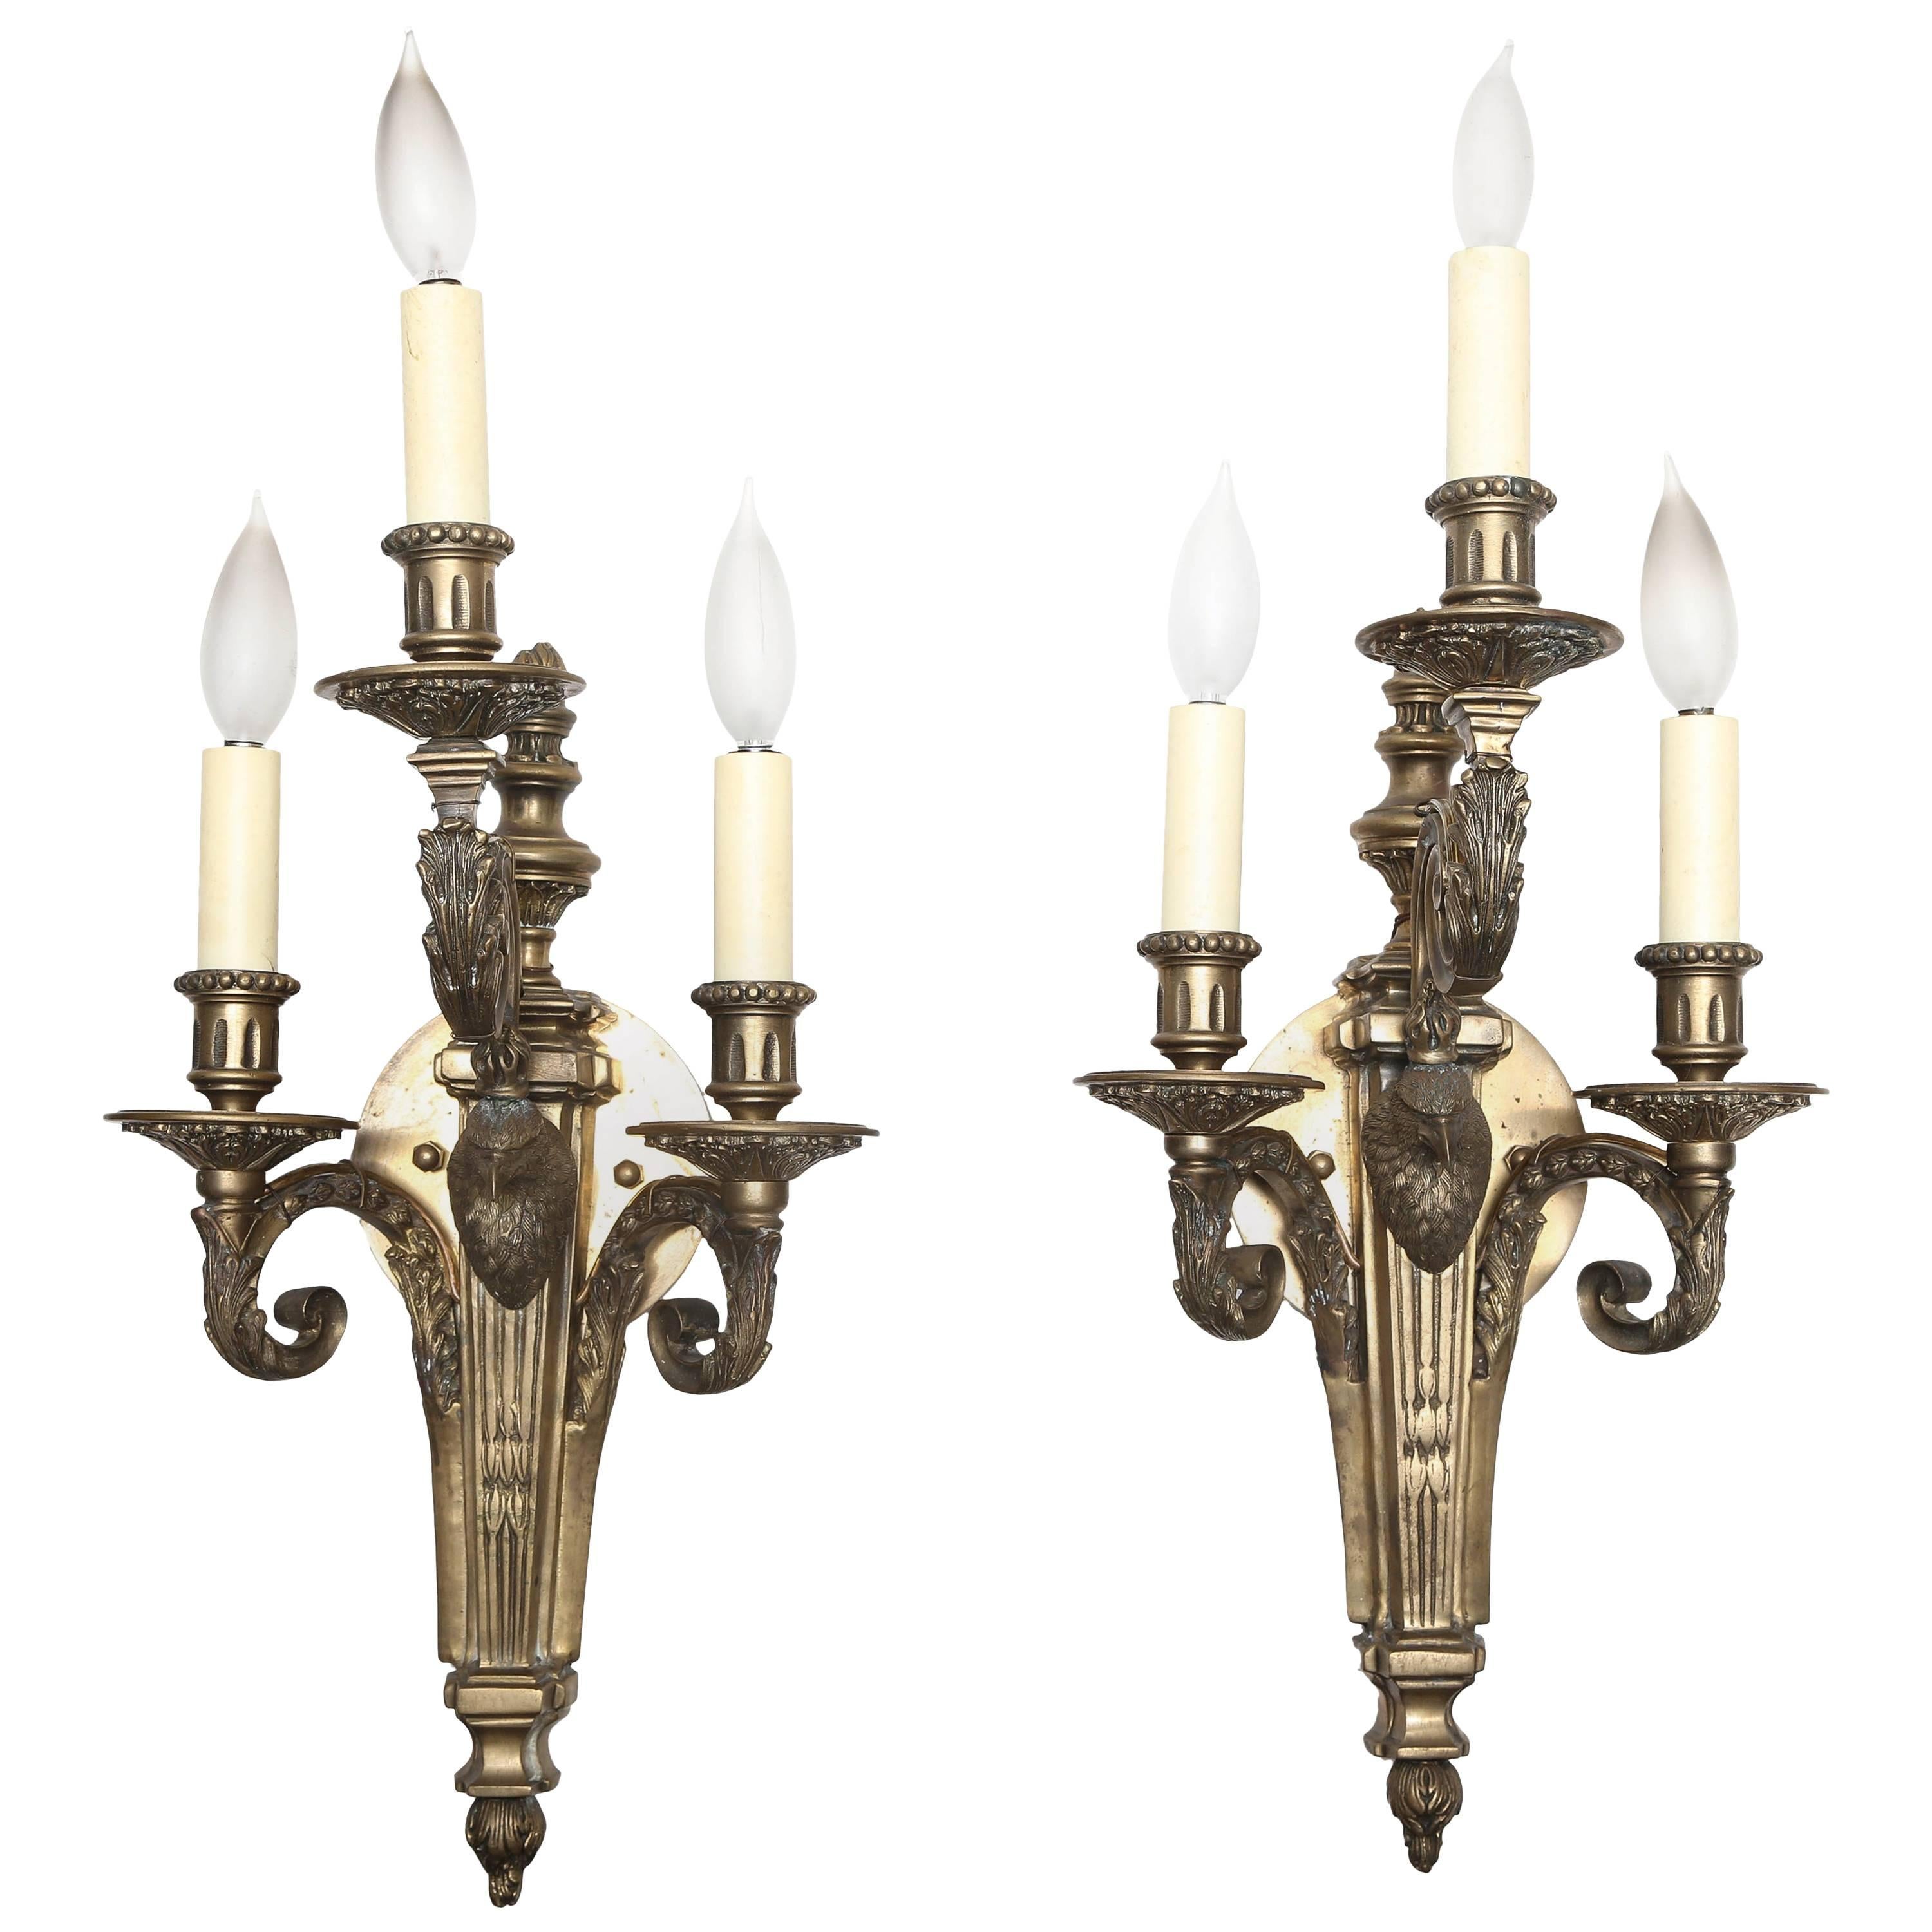 Superb Pair Of Russian Empire Style Sconces